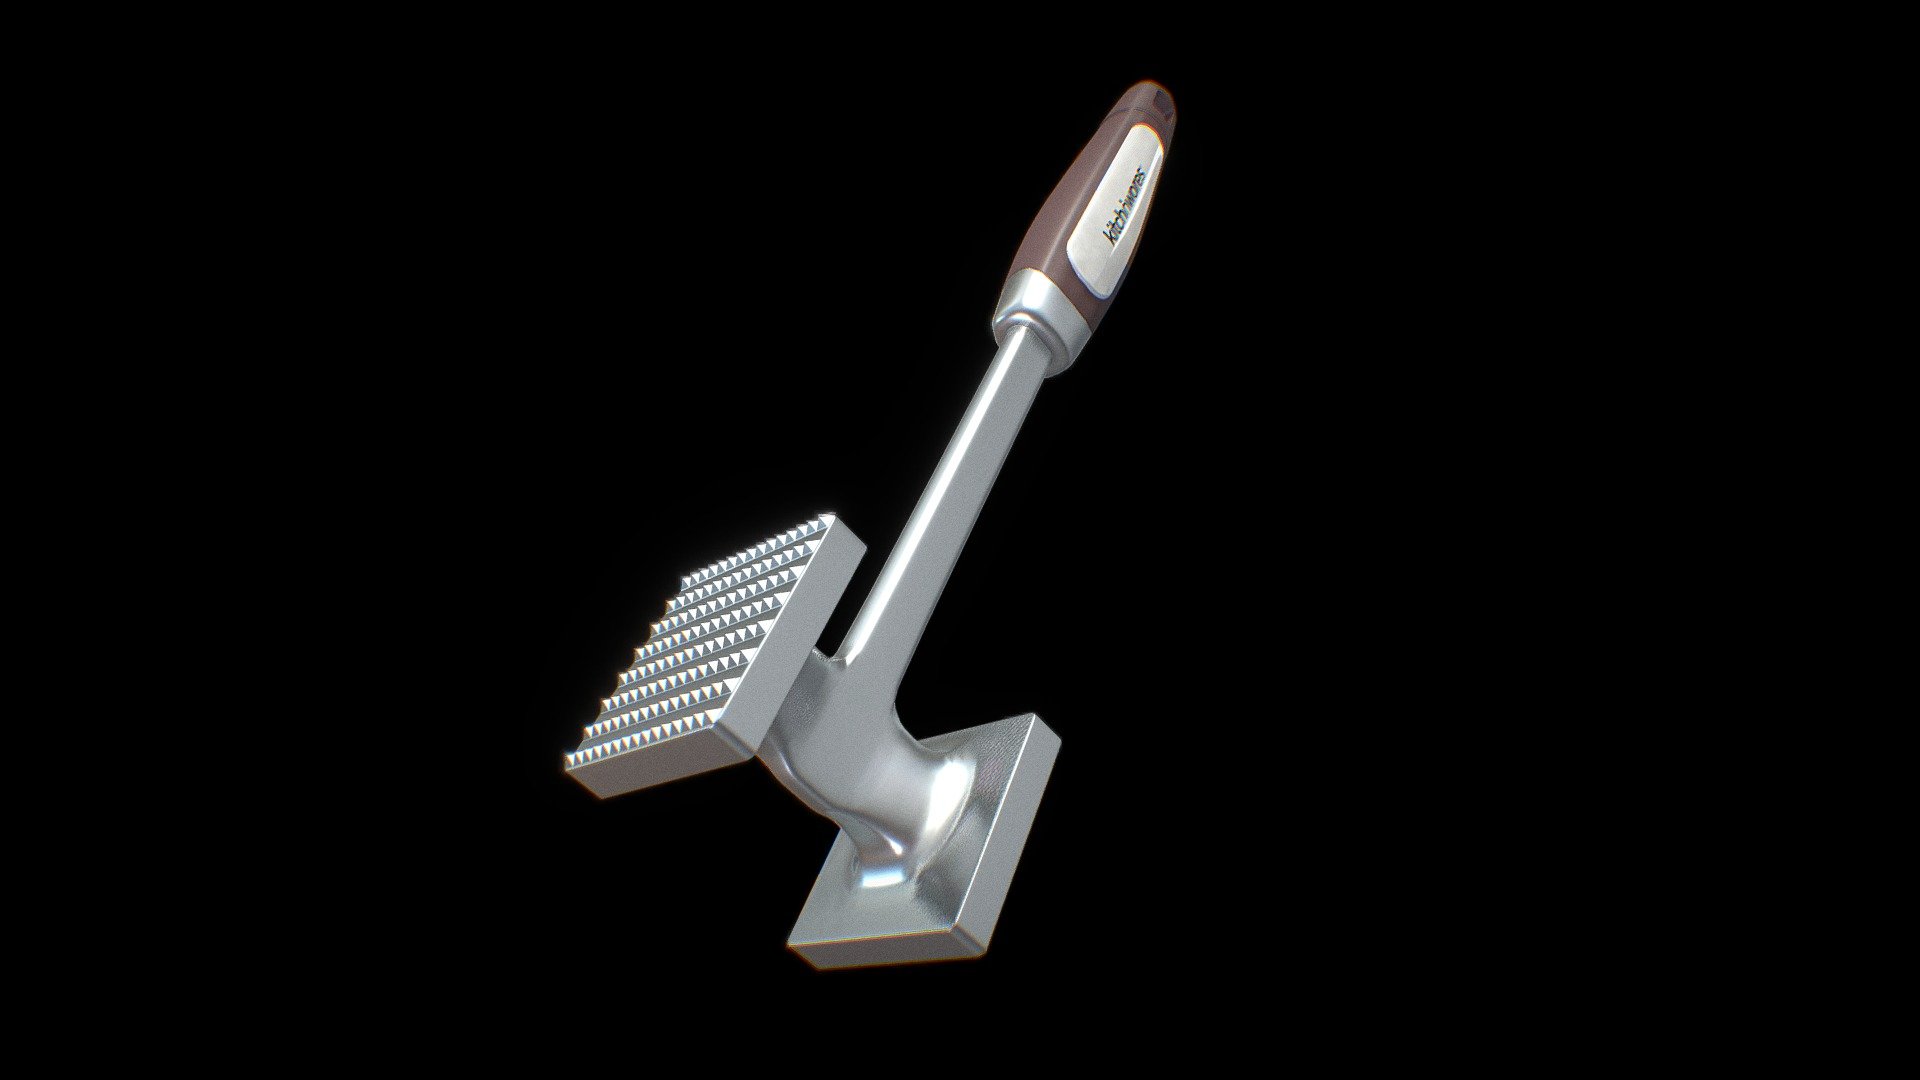 Kitchen model of an iron hammer for beating meat. The model was created in latest version of Blender and textured in Substance Painter.

4096 x 4096 resolution of textures.

BaseColor Normal Metalness Ambient Occlusion Roughness Textures - PNG - Meat Hammer Kitchnwares with brown rubber handle - Buy Royalty Free 3D model by 3dJNCTN (@surajrai18.sr) 3d model